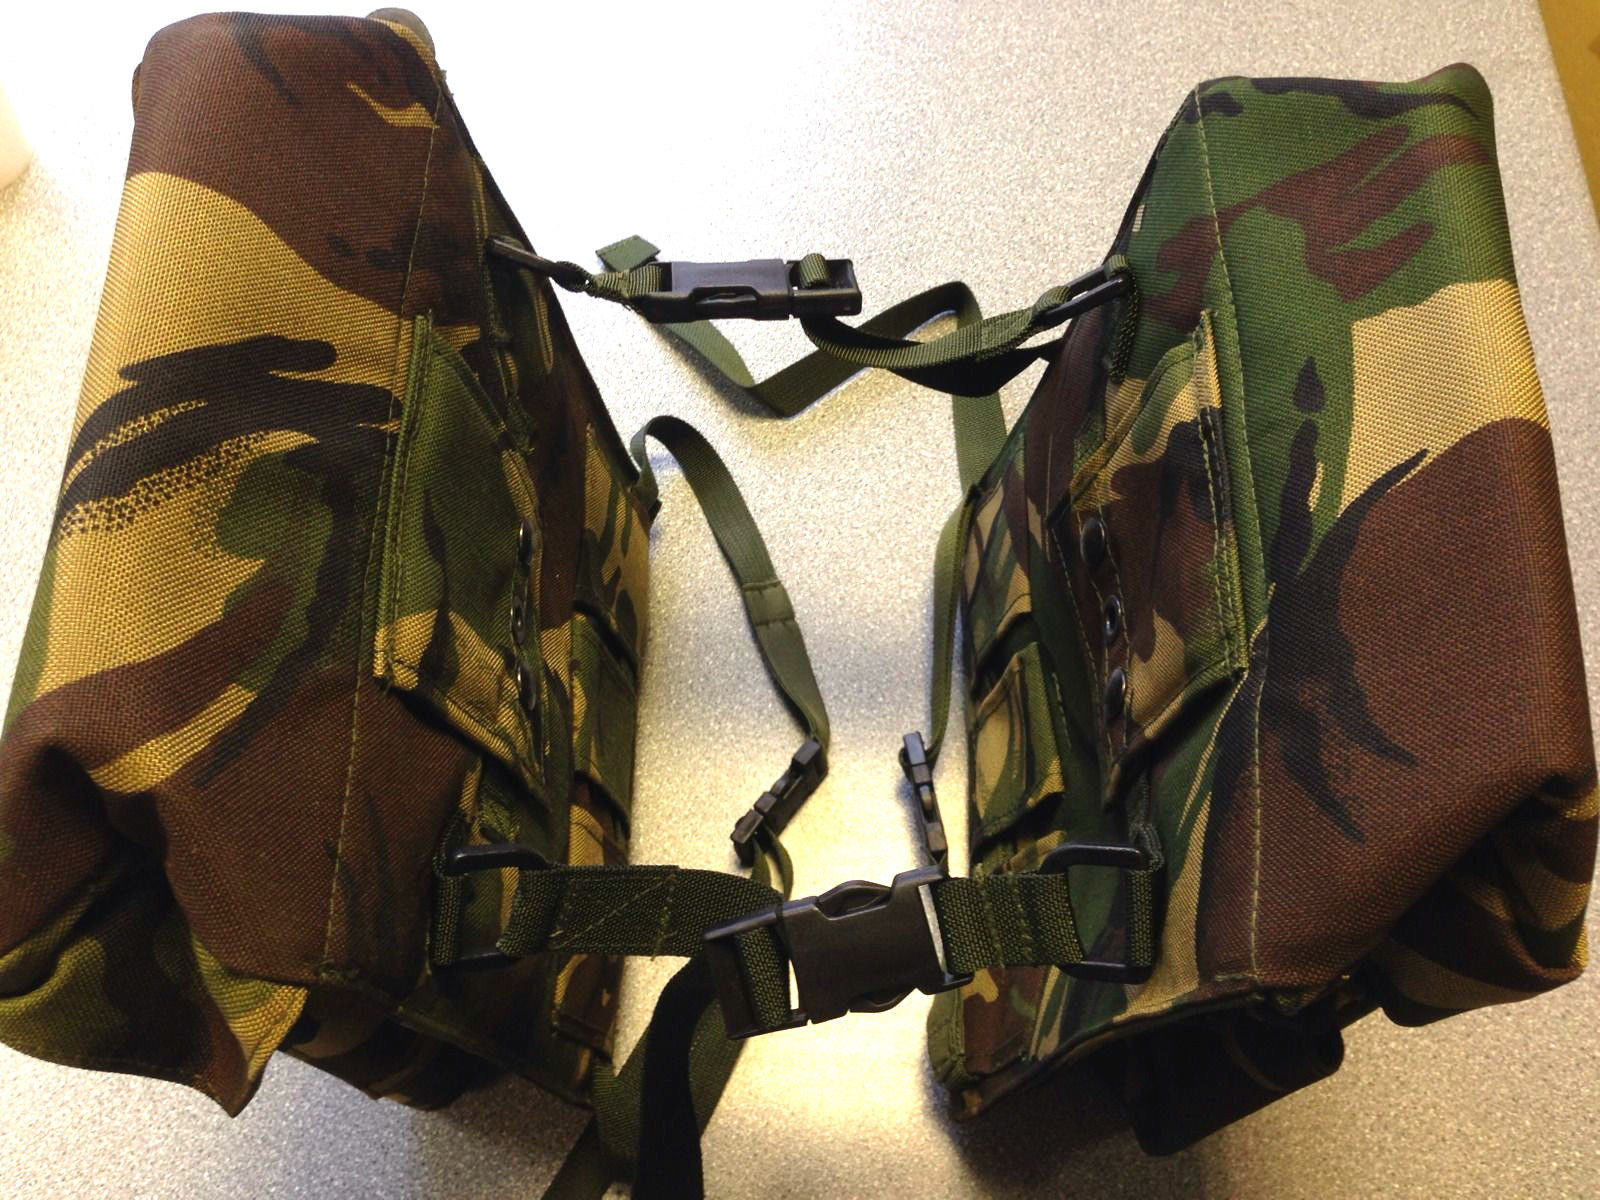 CAMOUFLAGE MOTORCYCLE PANNIERS - Silvermans
 - 9